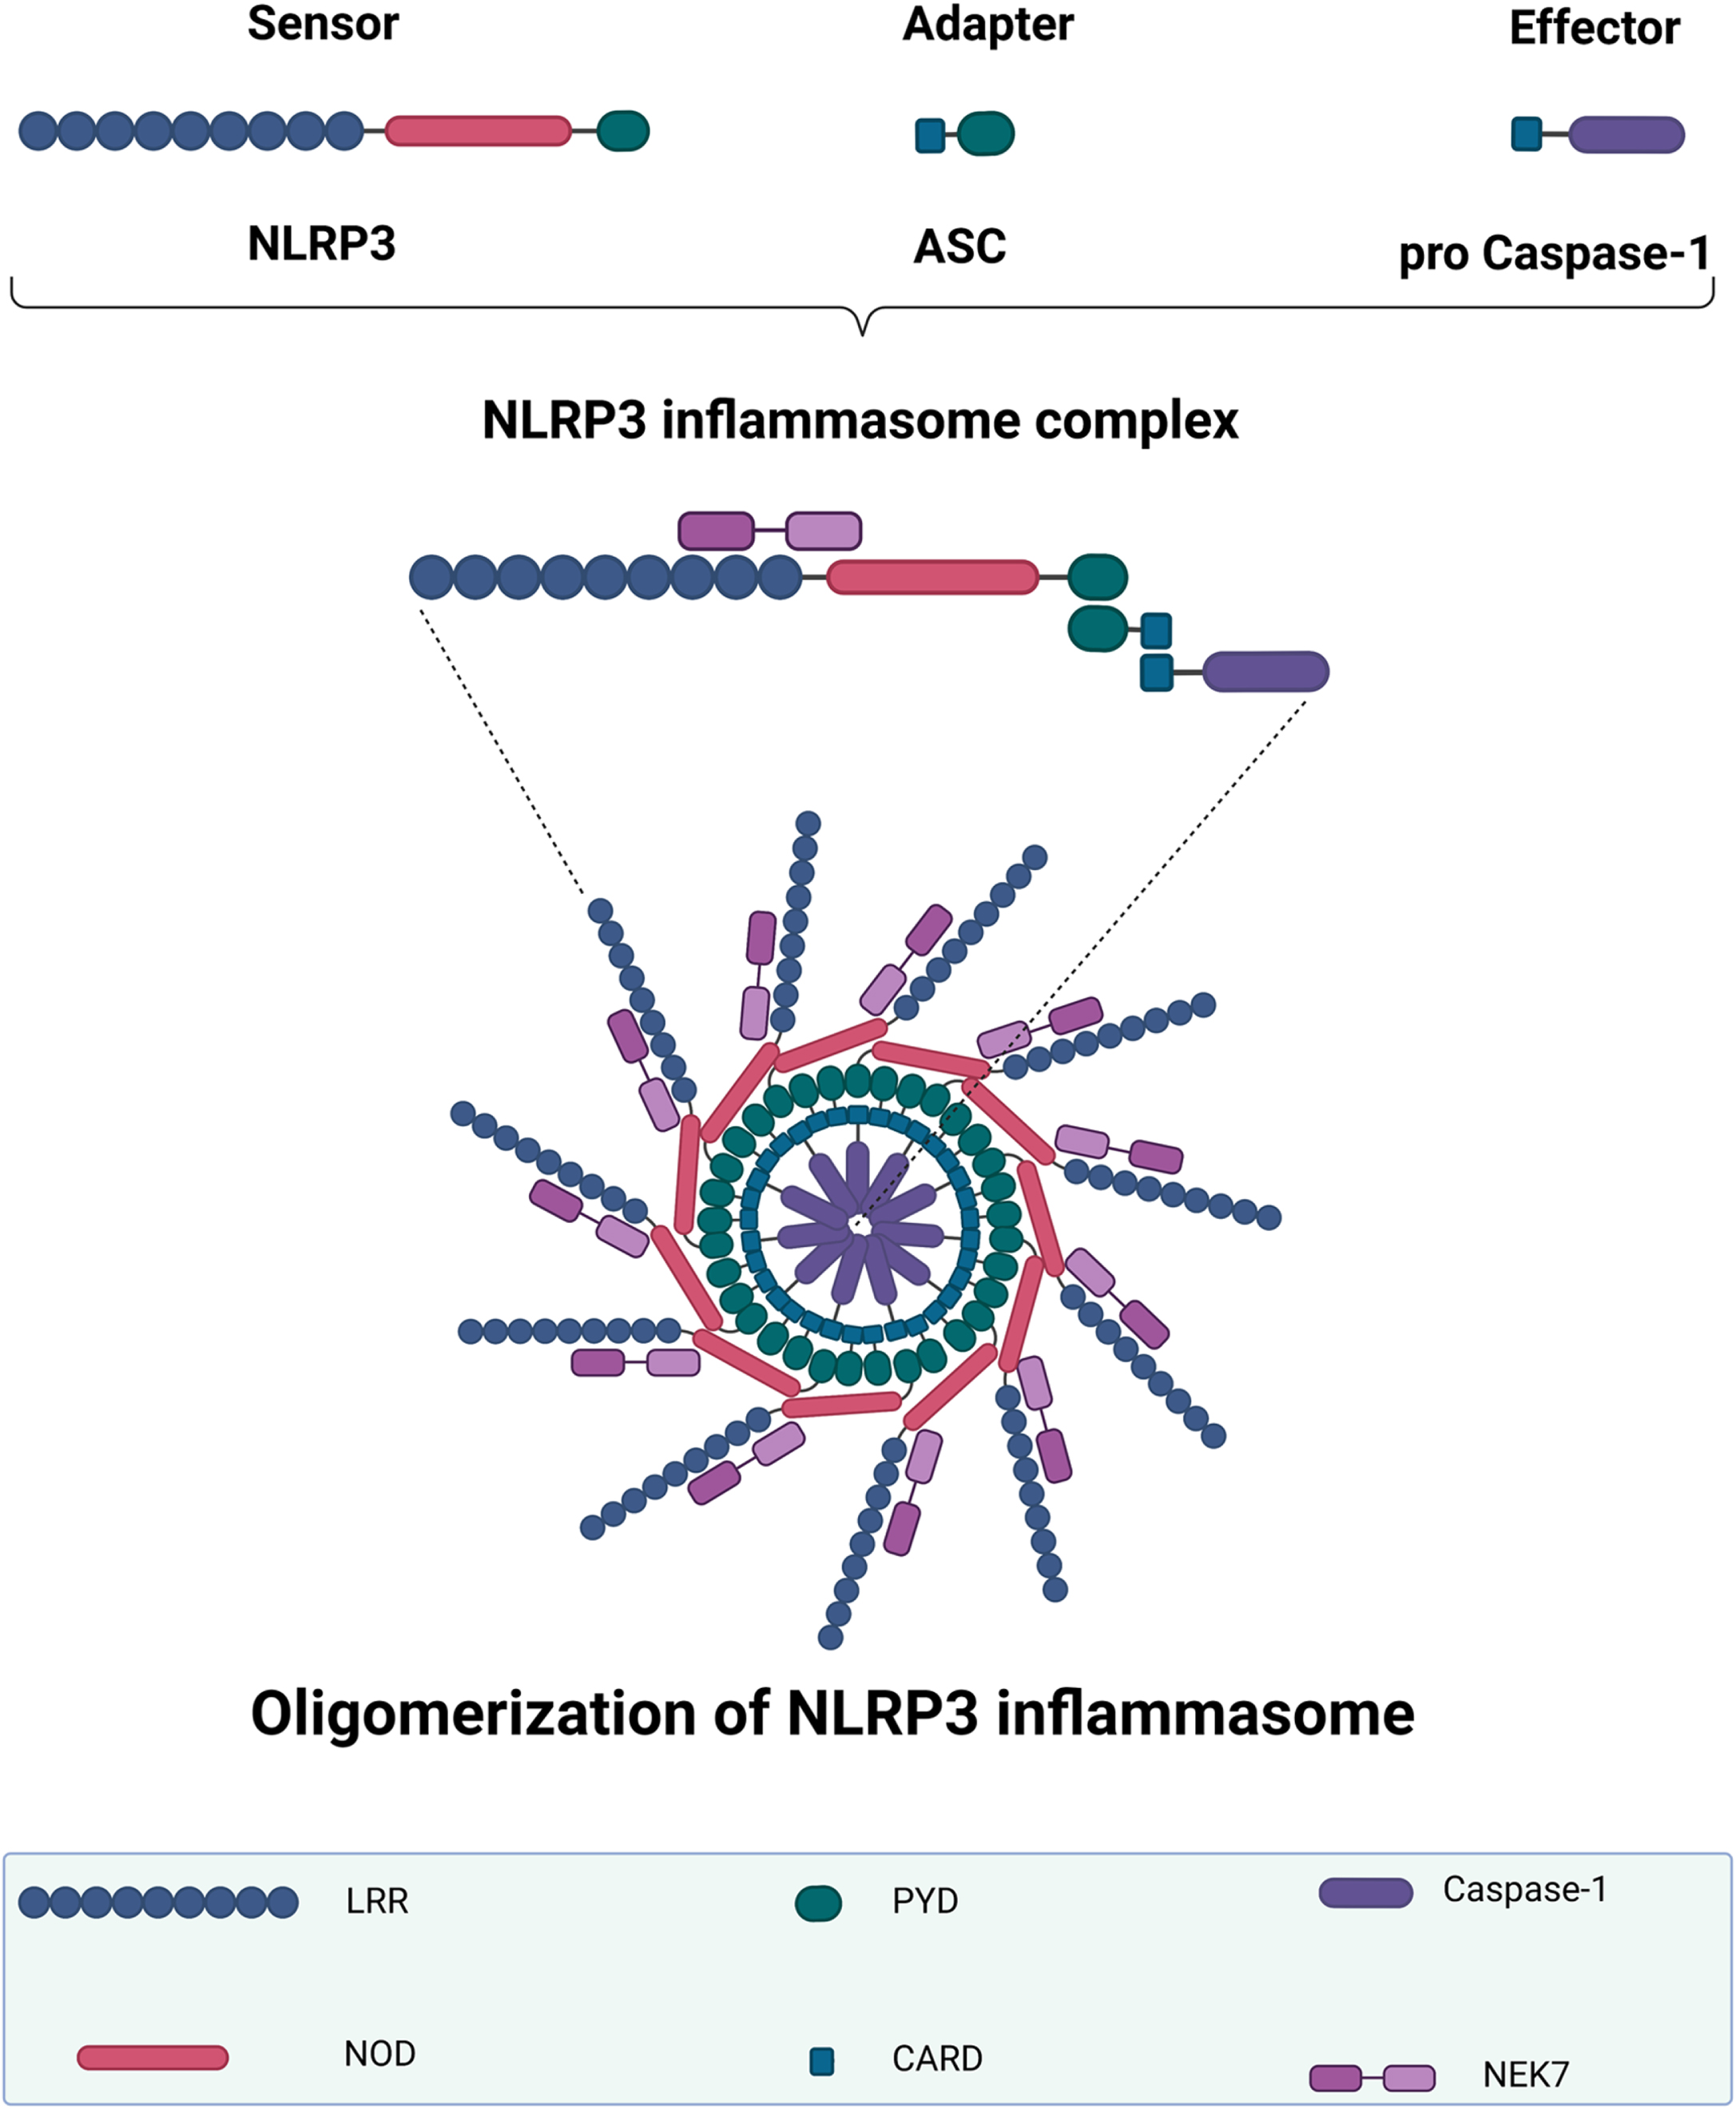 NLRP3 inflammasome structure and oligomerization. The NLRP3 inflammasome complex includes a sensor NLRP3 protein, an adapter ASC protein, and a pro-caspase-1 protein. When the NLRP3 inflammasome is activated, the adaptor protein ASC binds to the sensor NLRP3 protein via PYD–PYD polymerization. NLRP3 oligomerization occurs after this ASC recruits the effector protein pro-caspase-1 via its CARD. The first half of NEK7 binds to the NLRP3 LRR domain, whereas the second half interacts with the NOD. NLRP3, NOD-like receptor family-pyrin domain-containing 3; LRR, leucine-rich repeat; NOD, nucleotide-binding oligomerization domain; PYD, pyrin domain; ASC, apoptosis-associated speck-like protein containing a CARD; CARD, caspase recruitment domain; NEK7, NIMA-related kinase 7. The graph was created using Biorender.com.